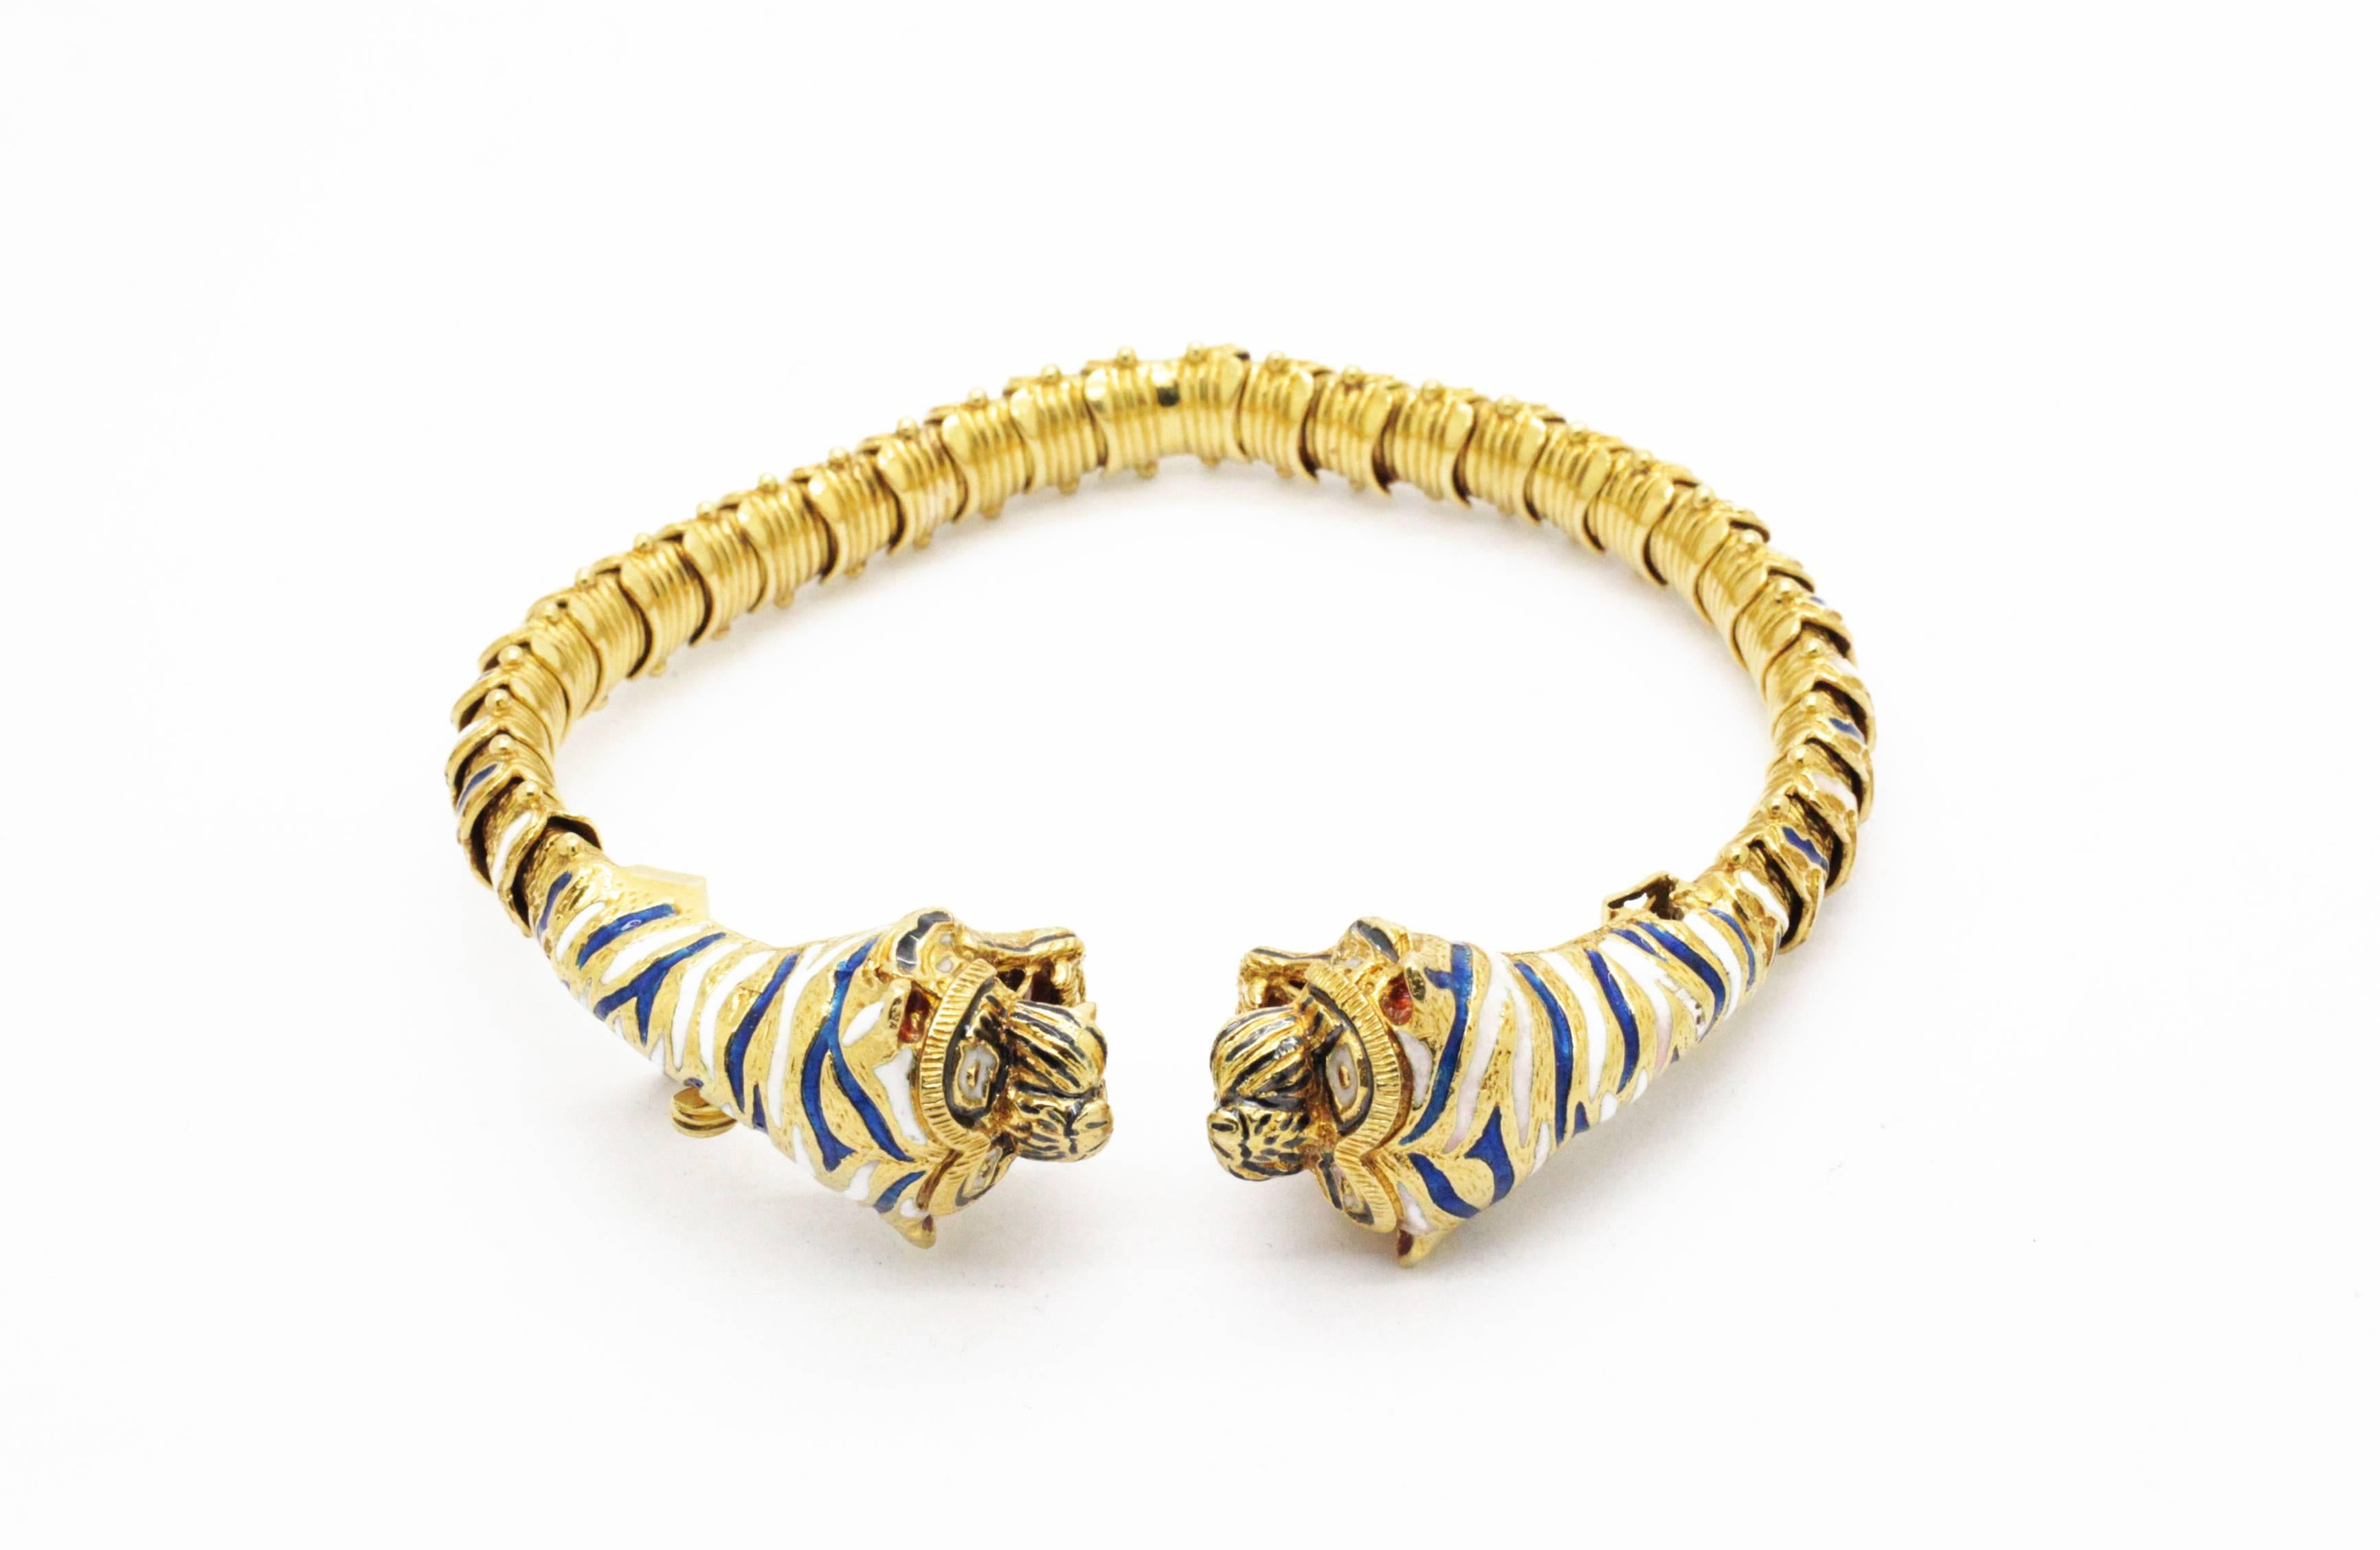 Stunning unique piece, a double headed tiger bracelet made in 18k yellow gold and hand colored with  enamel, in excellent conditions. A rich looking piece of great jewelry.